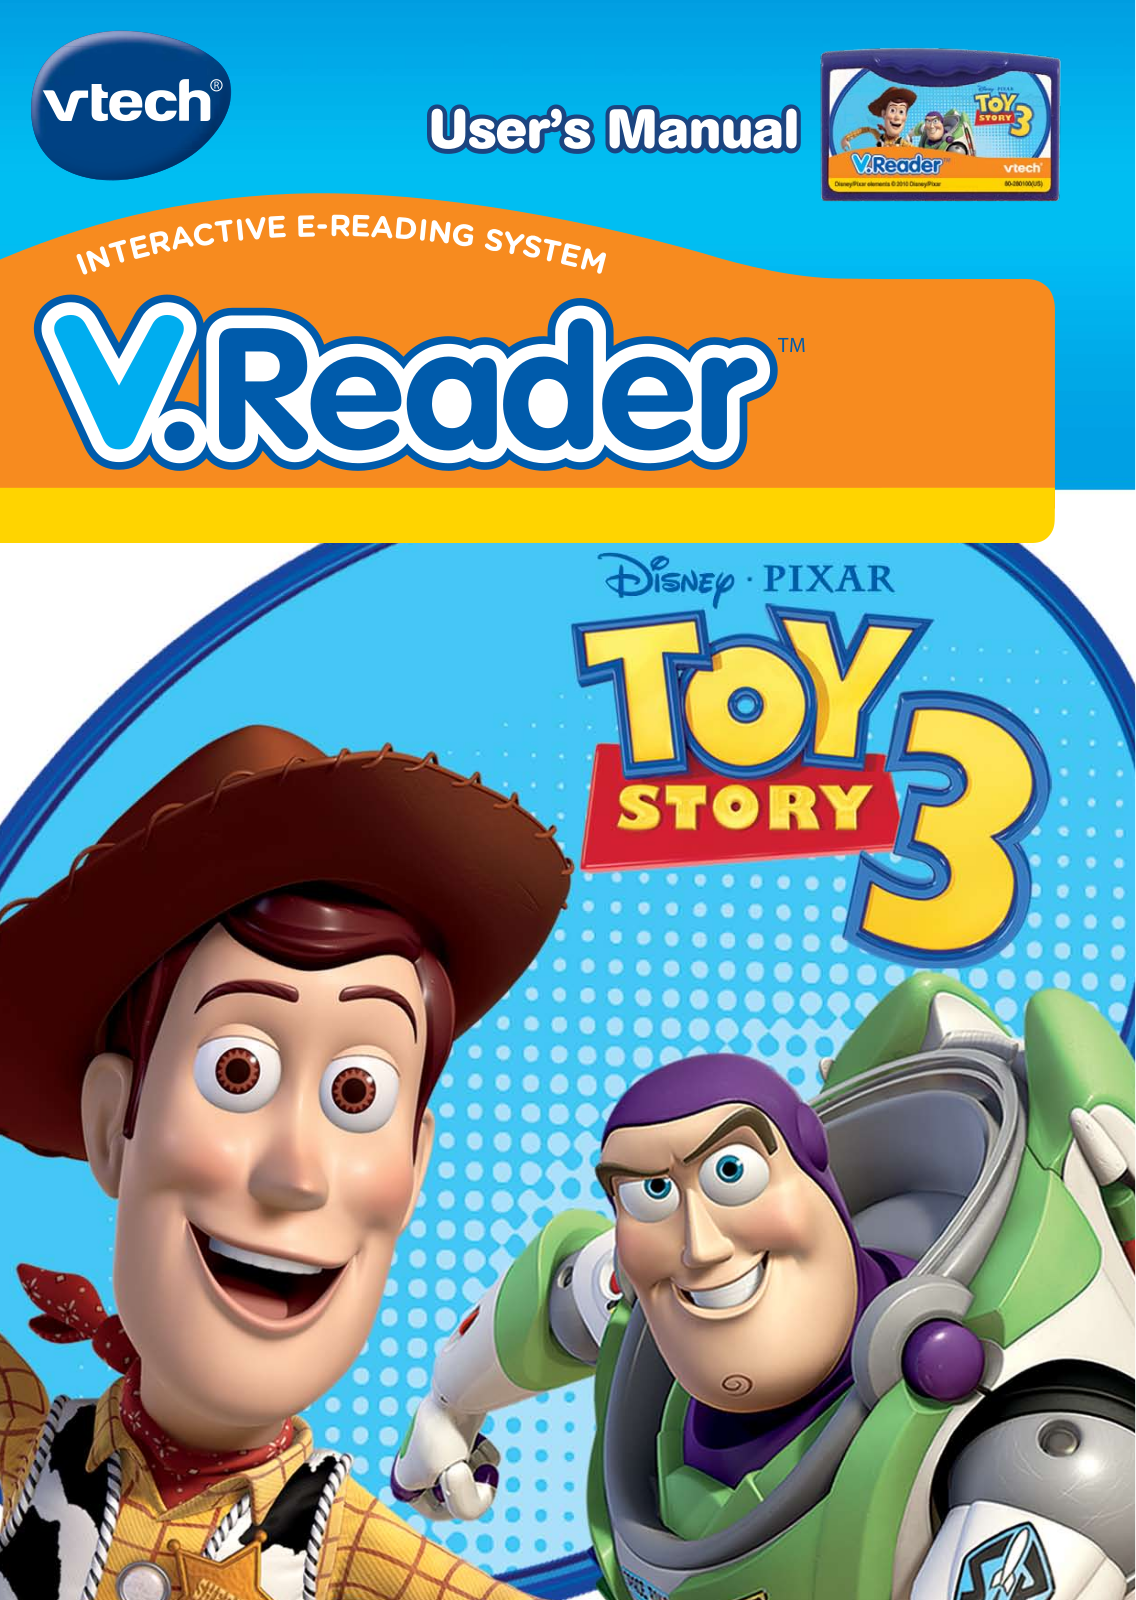 VTech V.Reader Cartridge - Toy Story 3 CLEARANCE Owner's Manual